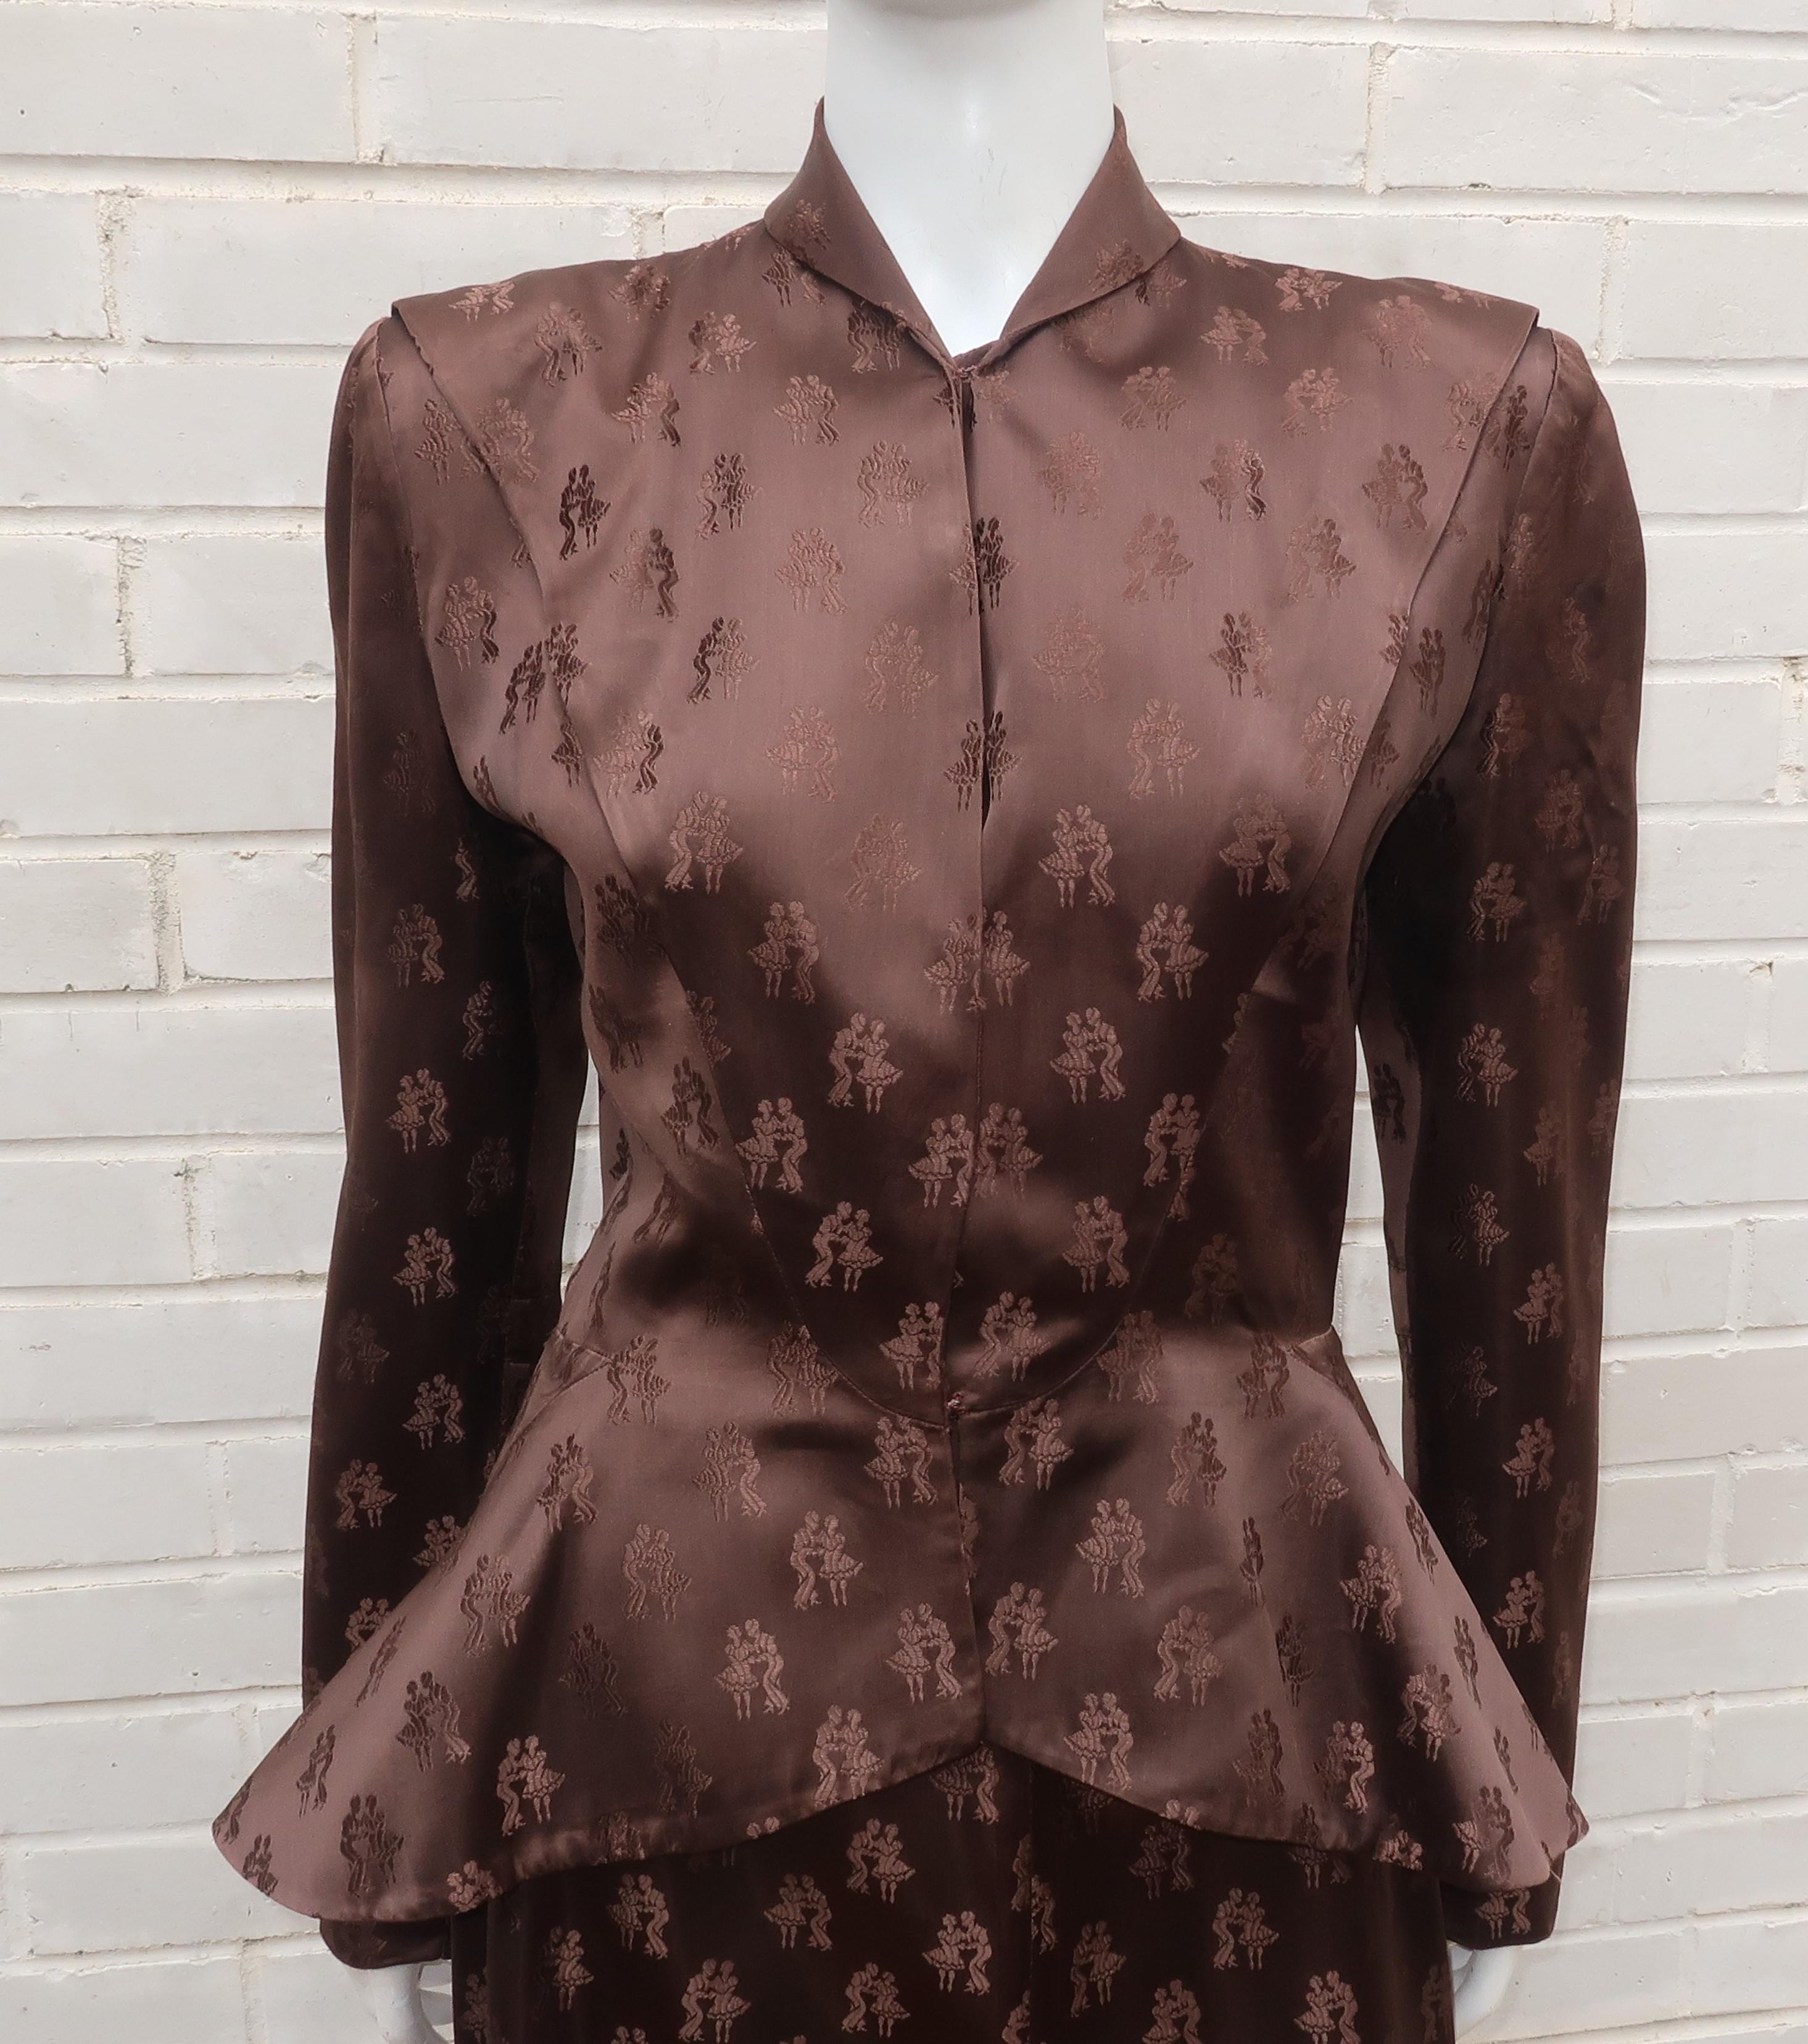 1940's Mildred O'Quinn brown satin jacquard skirt suit with a fun fabric depicting swing dancers.  The classic '40's silhouette includes a peplum shaped jacket with defined shoulders and a modified a-line skirt.  The jacket has hidden hook closures